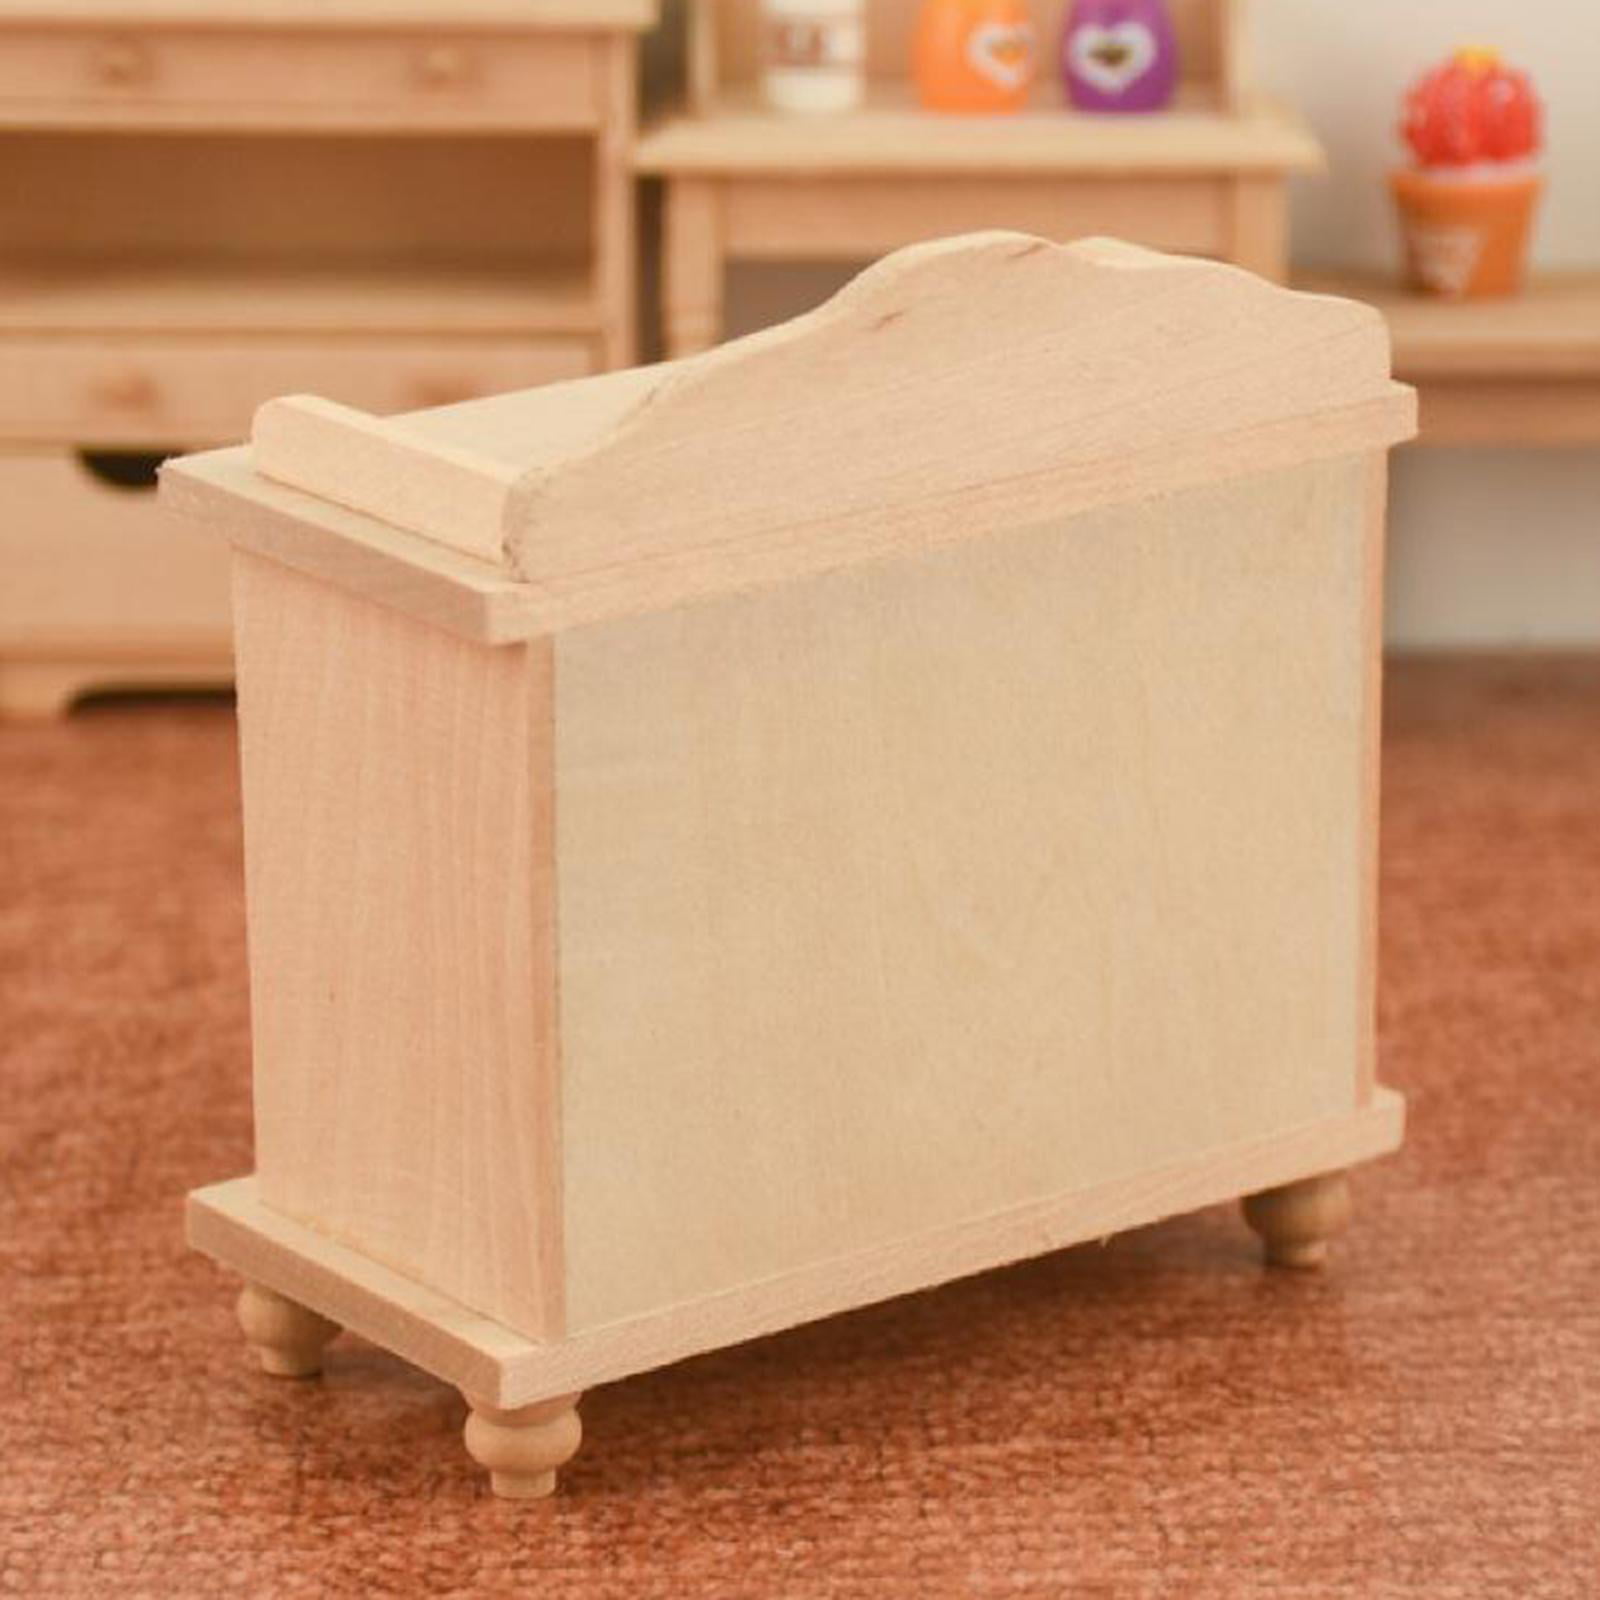 Details about   1:12 Scale Dollhouse Handmade Wooden Nightstand TV Cabinet Bedroom Furniture 